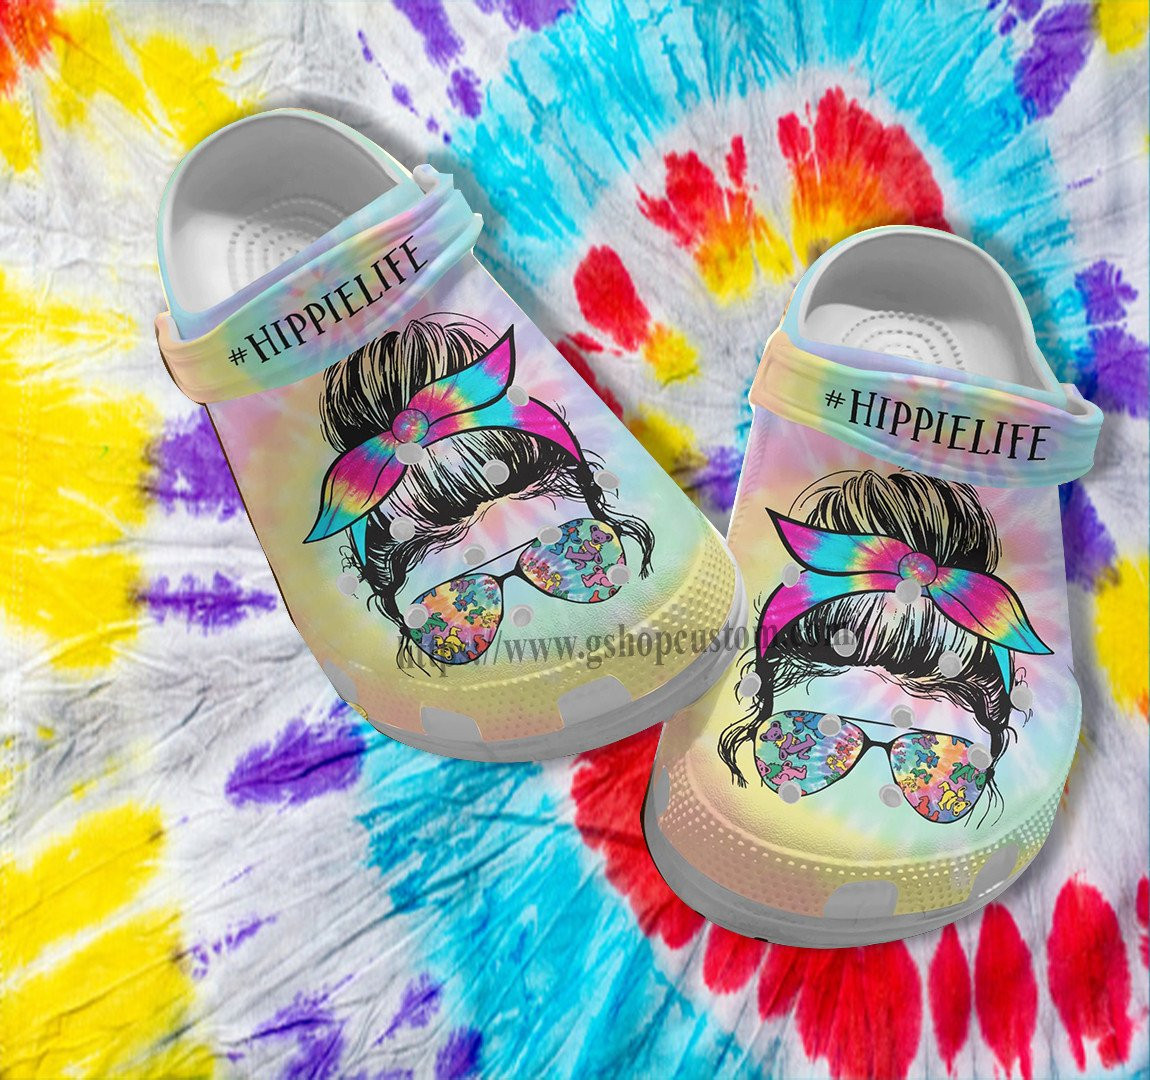 Hippie Life Girl Glasses Croc Crocs Shoes Gift Mommy- Hippie Rainbow Crocs Shoes Croc Clogs Customize Mother Day Gift